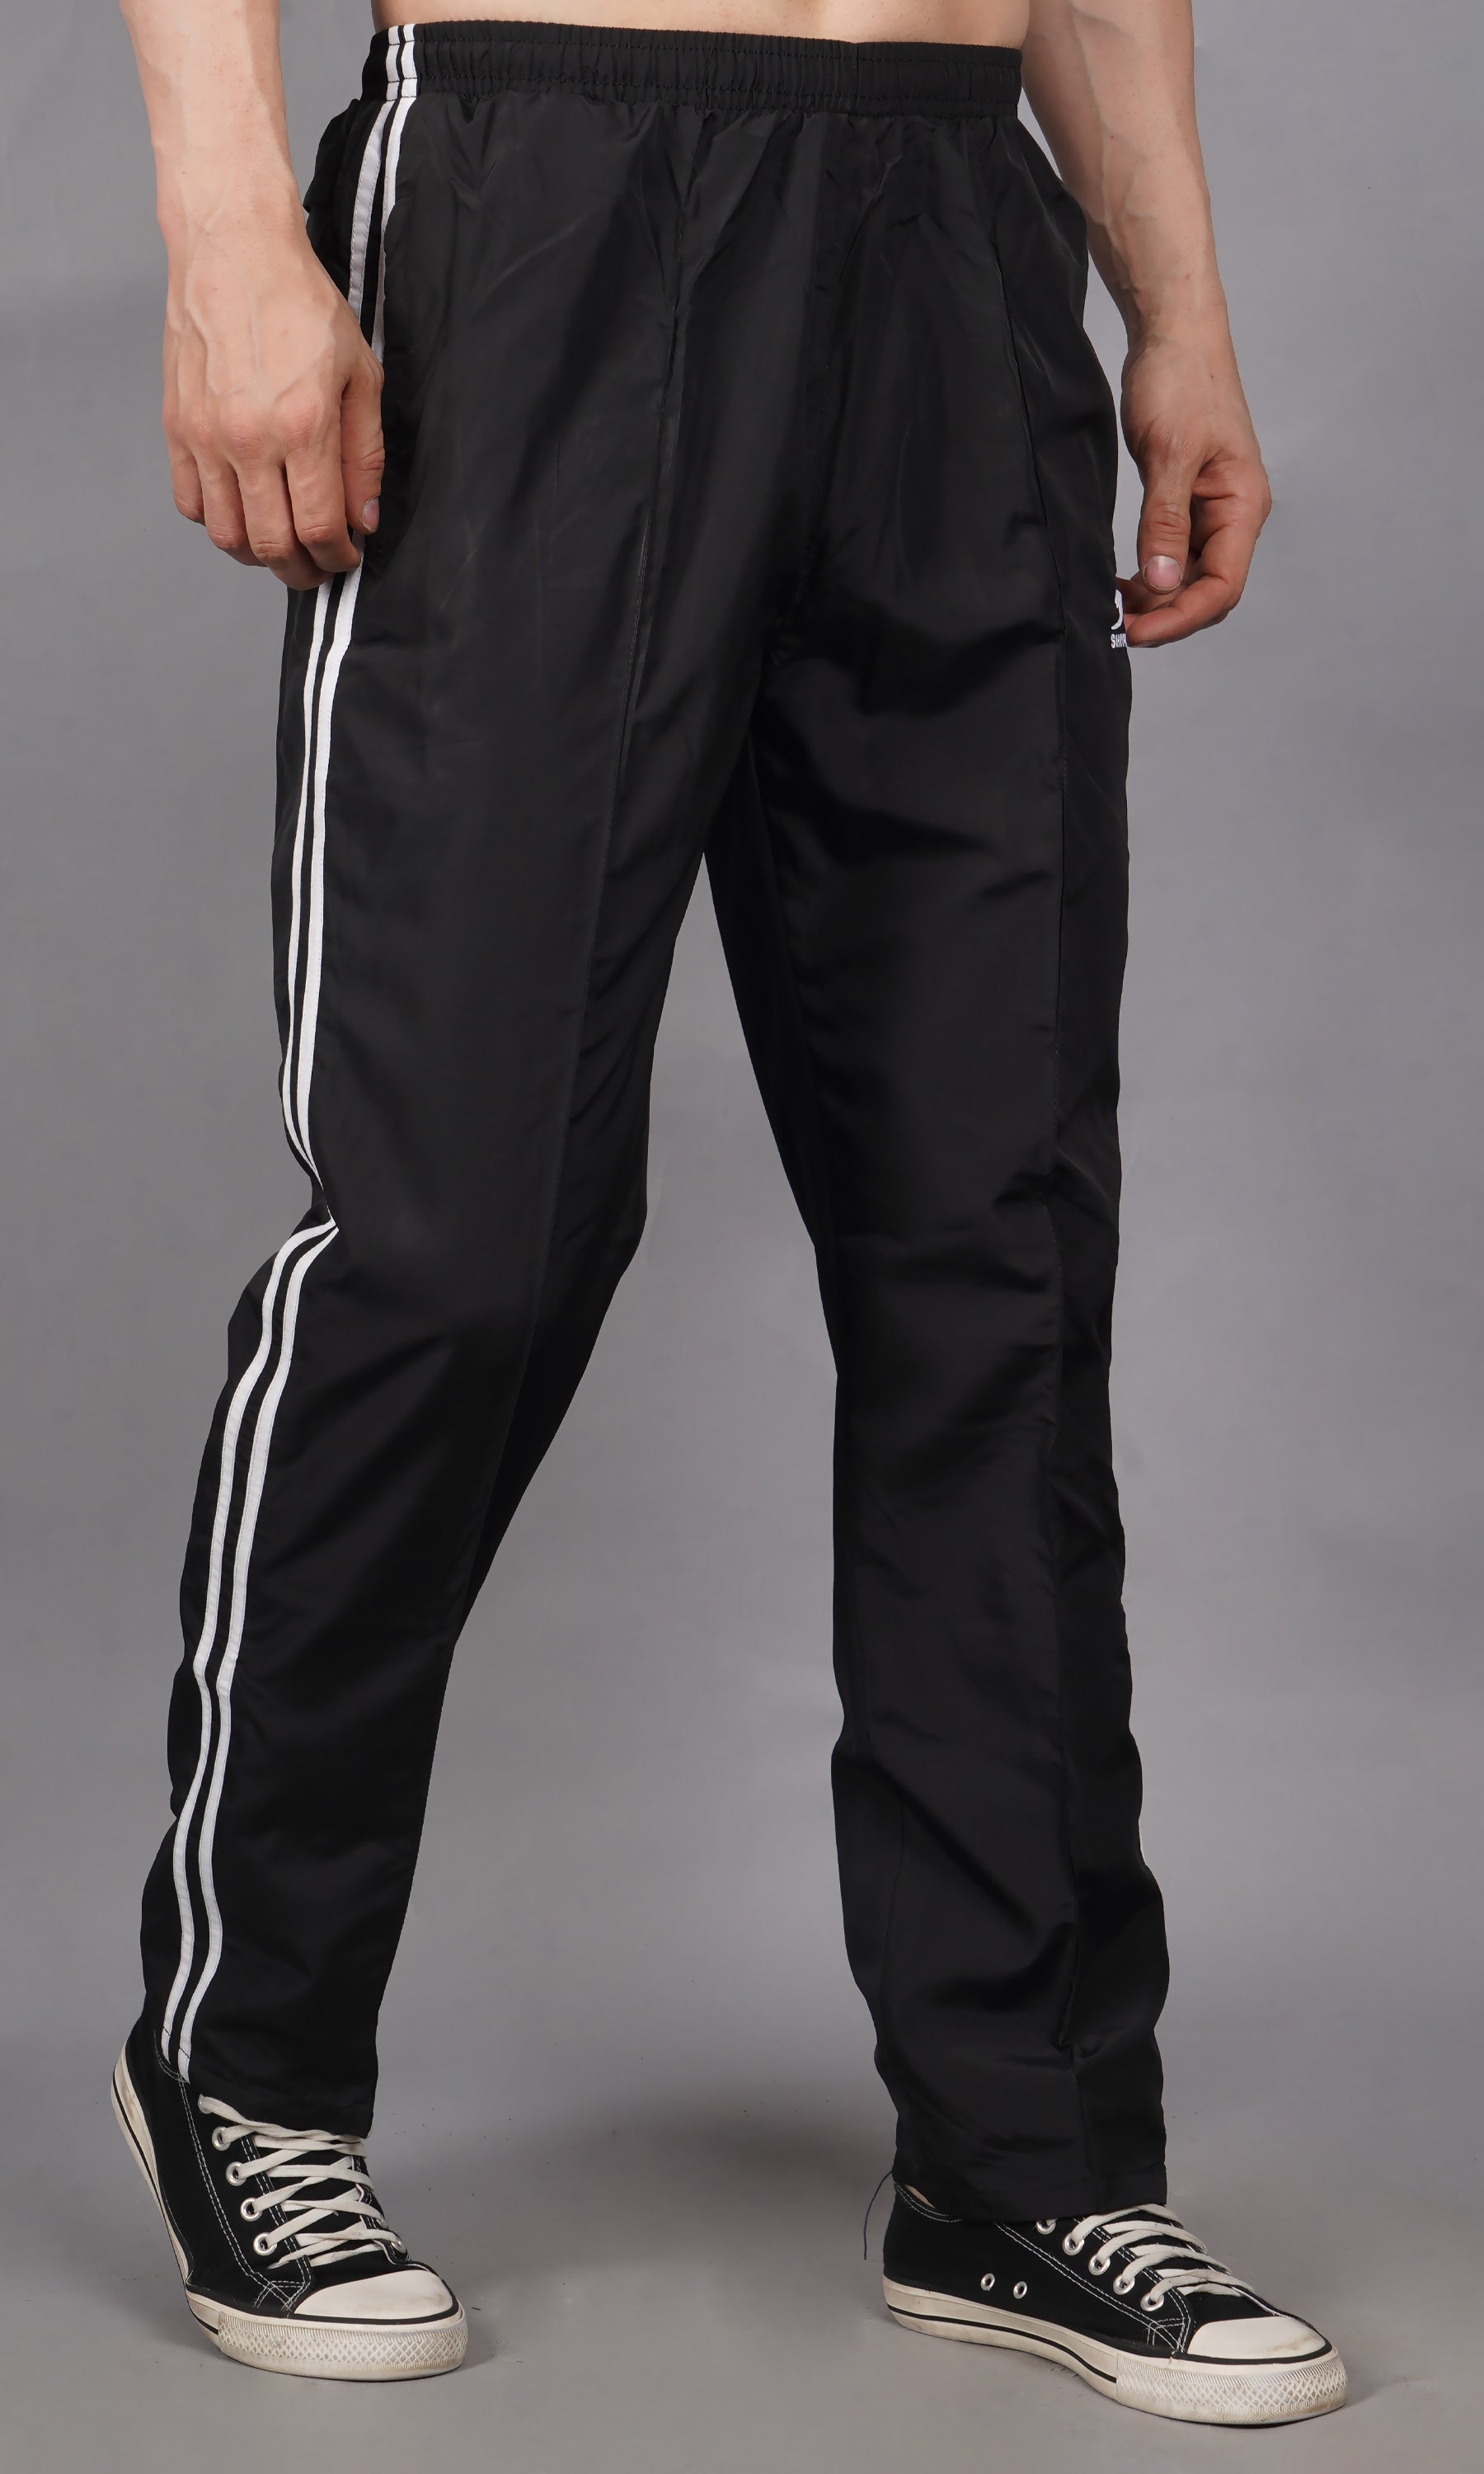 Dpassion 4 Way Lycra Regular fit Running Track Pants for MenBoys  Lower  for Men Stylish